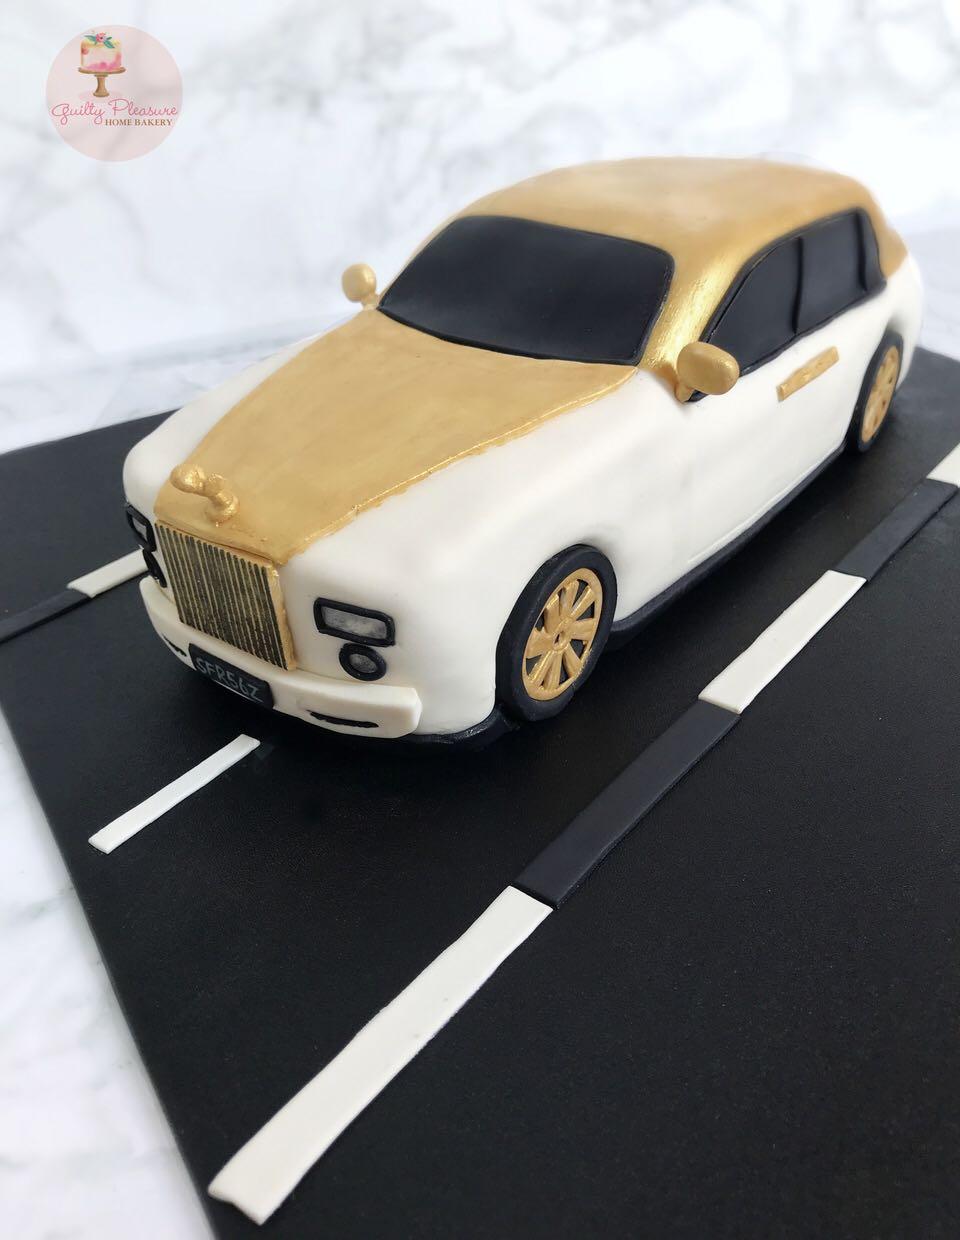 Gents Birthday Cakes | Dlux Cakes | Kingston upon Thames